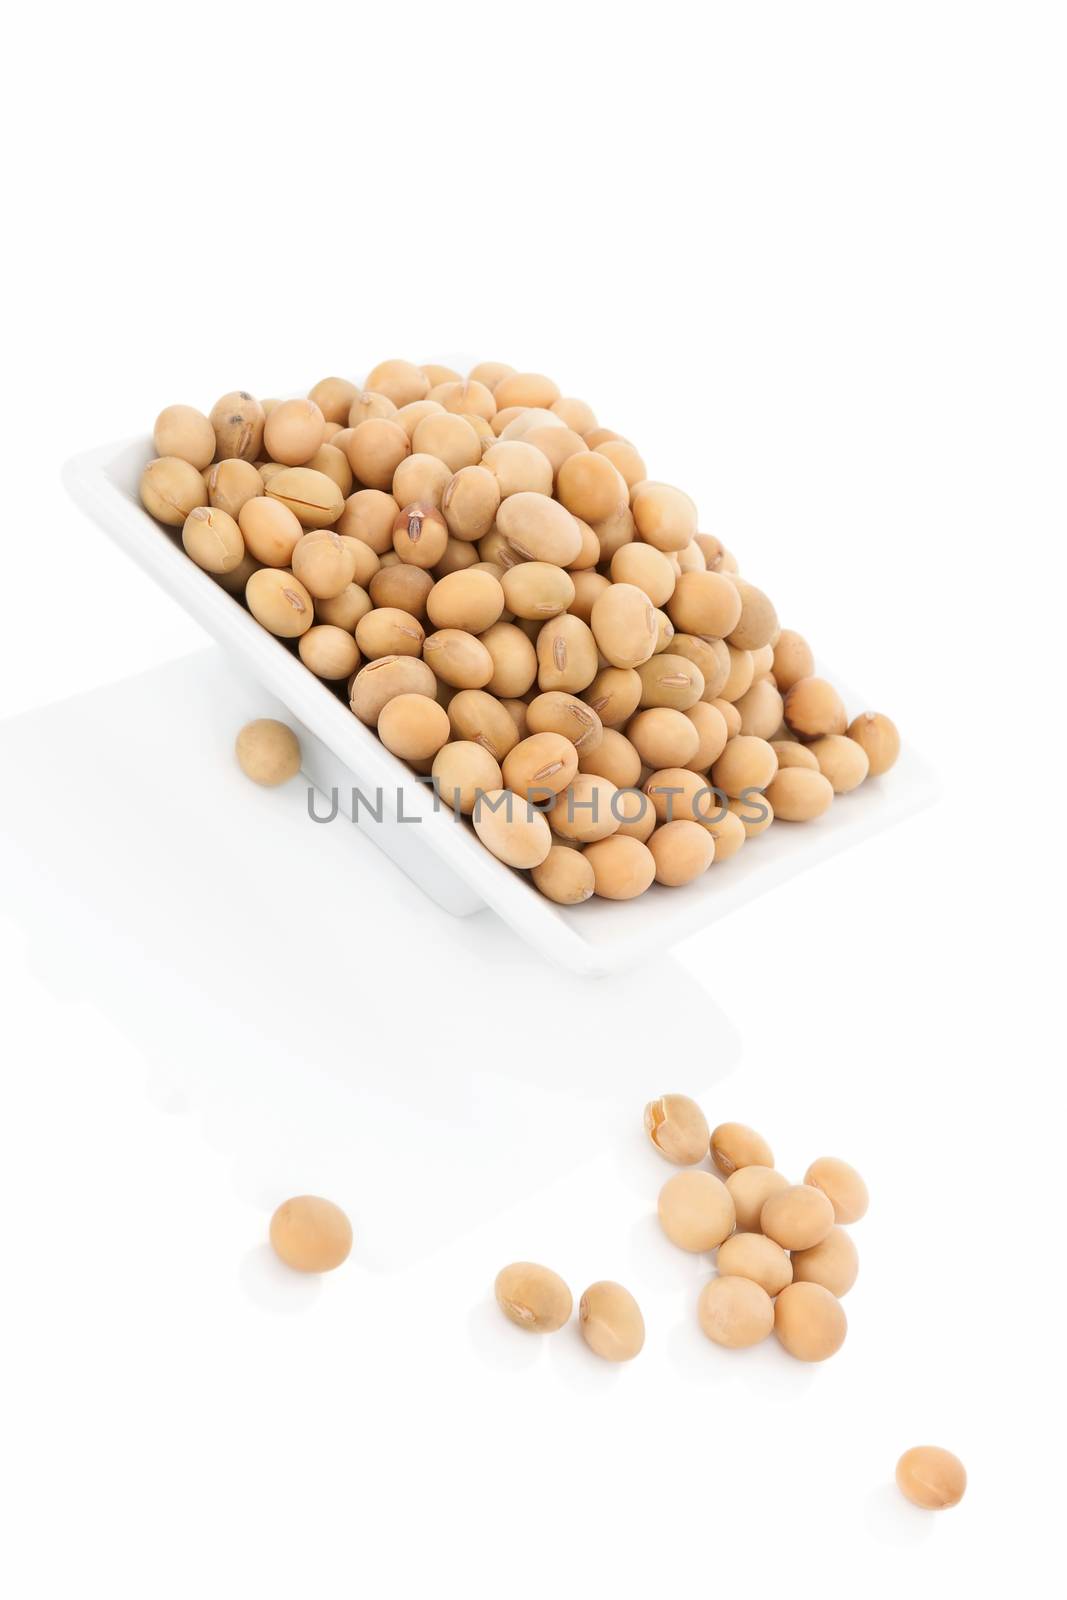 Soybeans isolated on white background. Vegetarian and vegan eating concept.